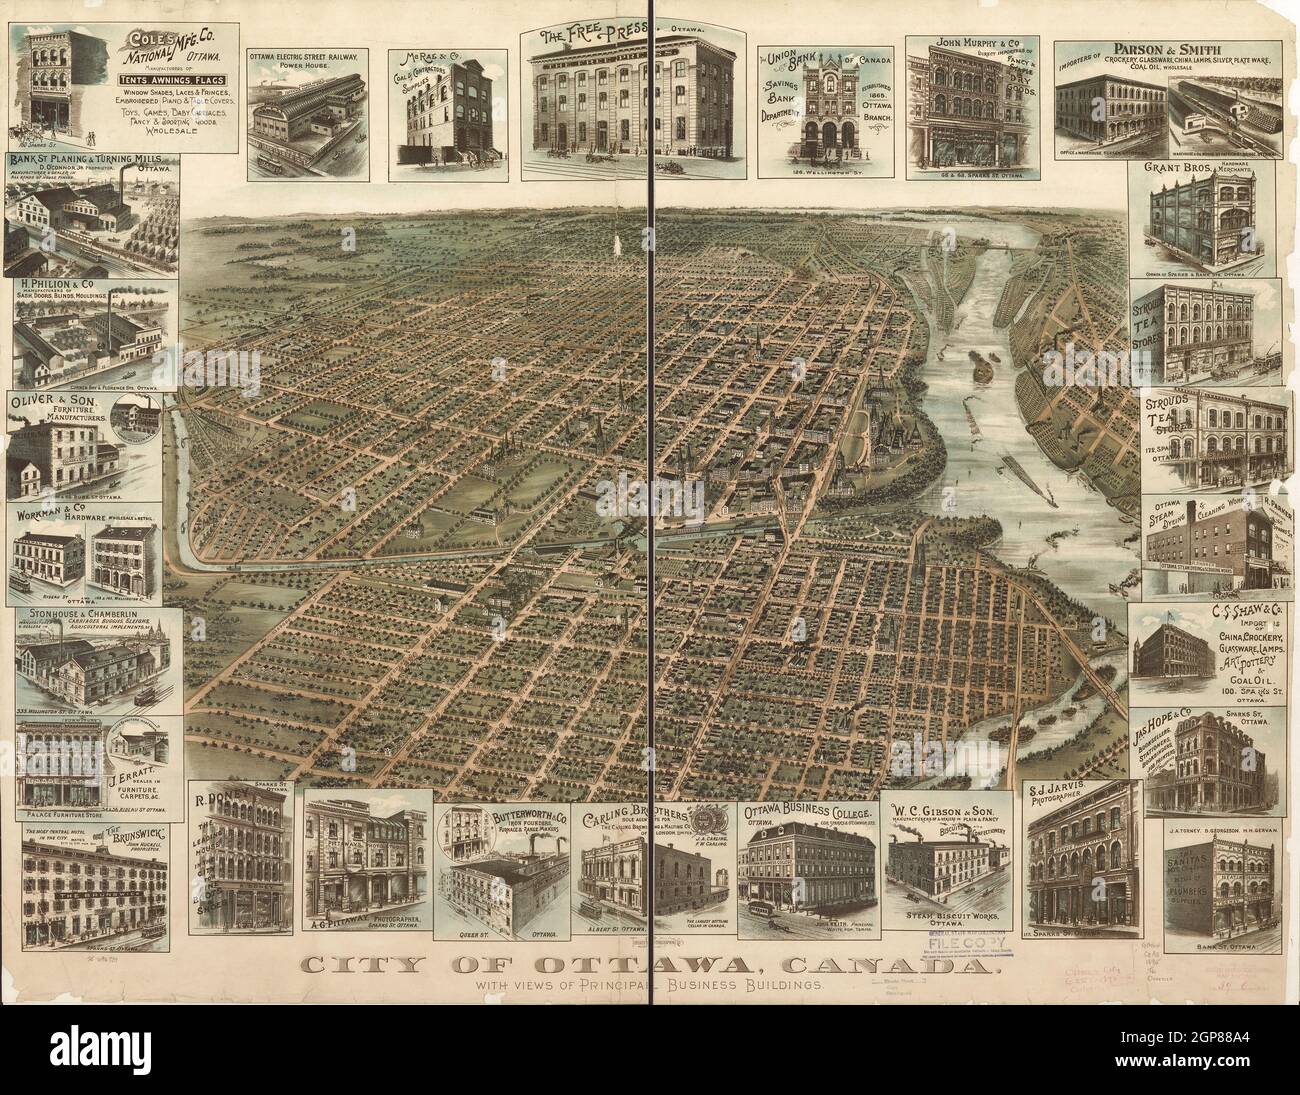 Panoramic map of the city of Ottawa, Ontario, Canada with views of principal business buildings in 1895. Stock Photo